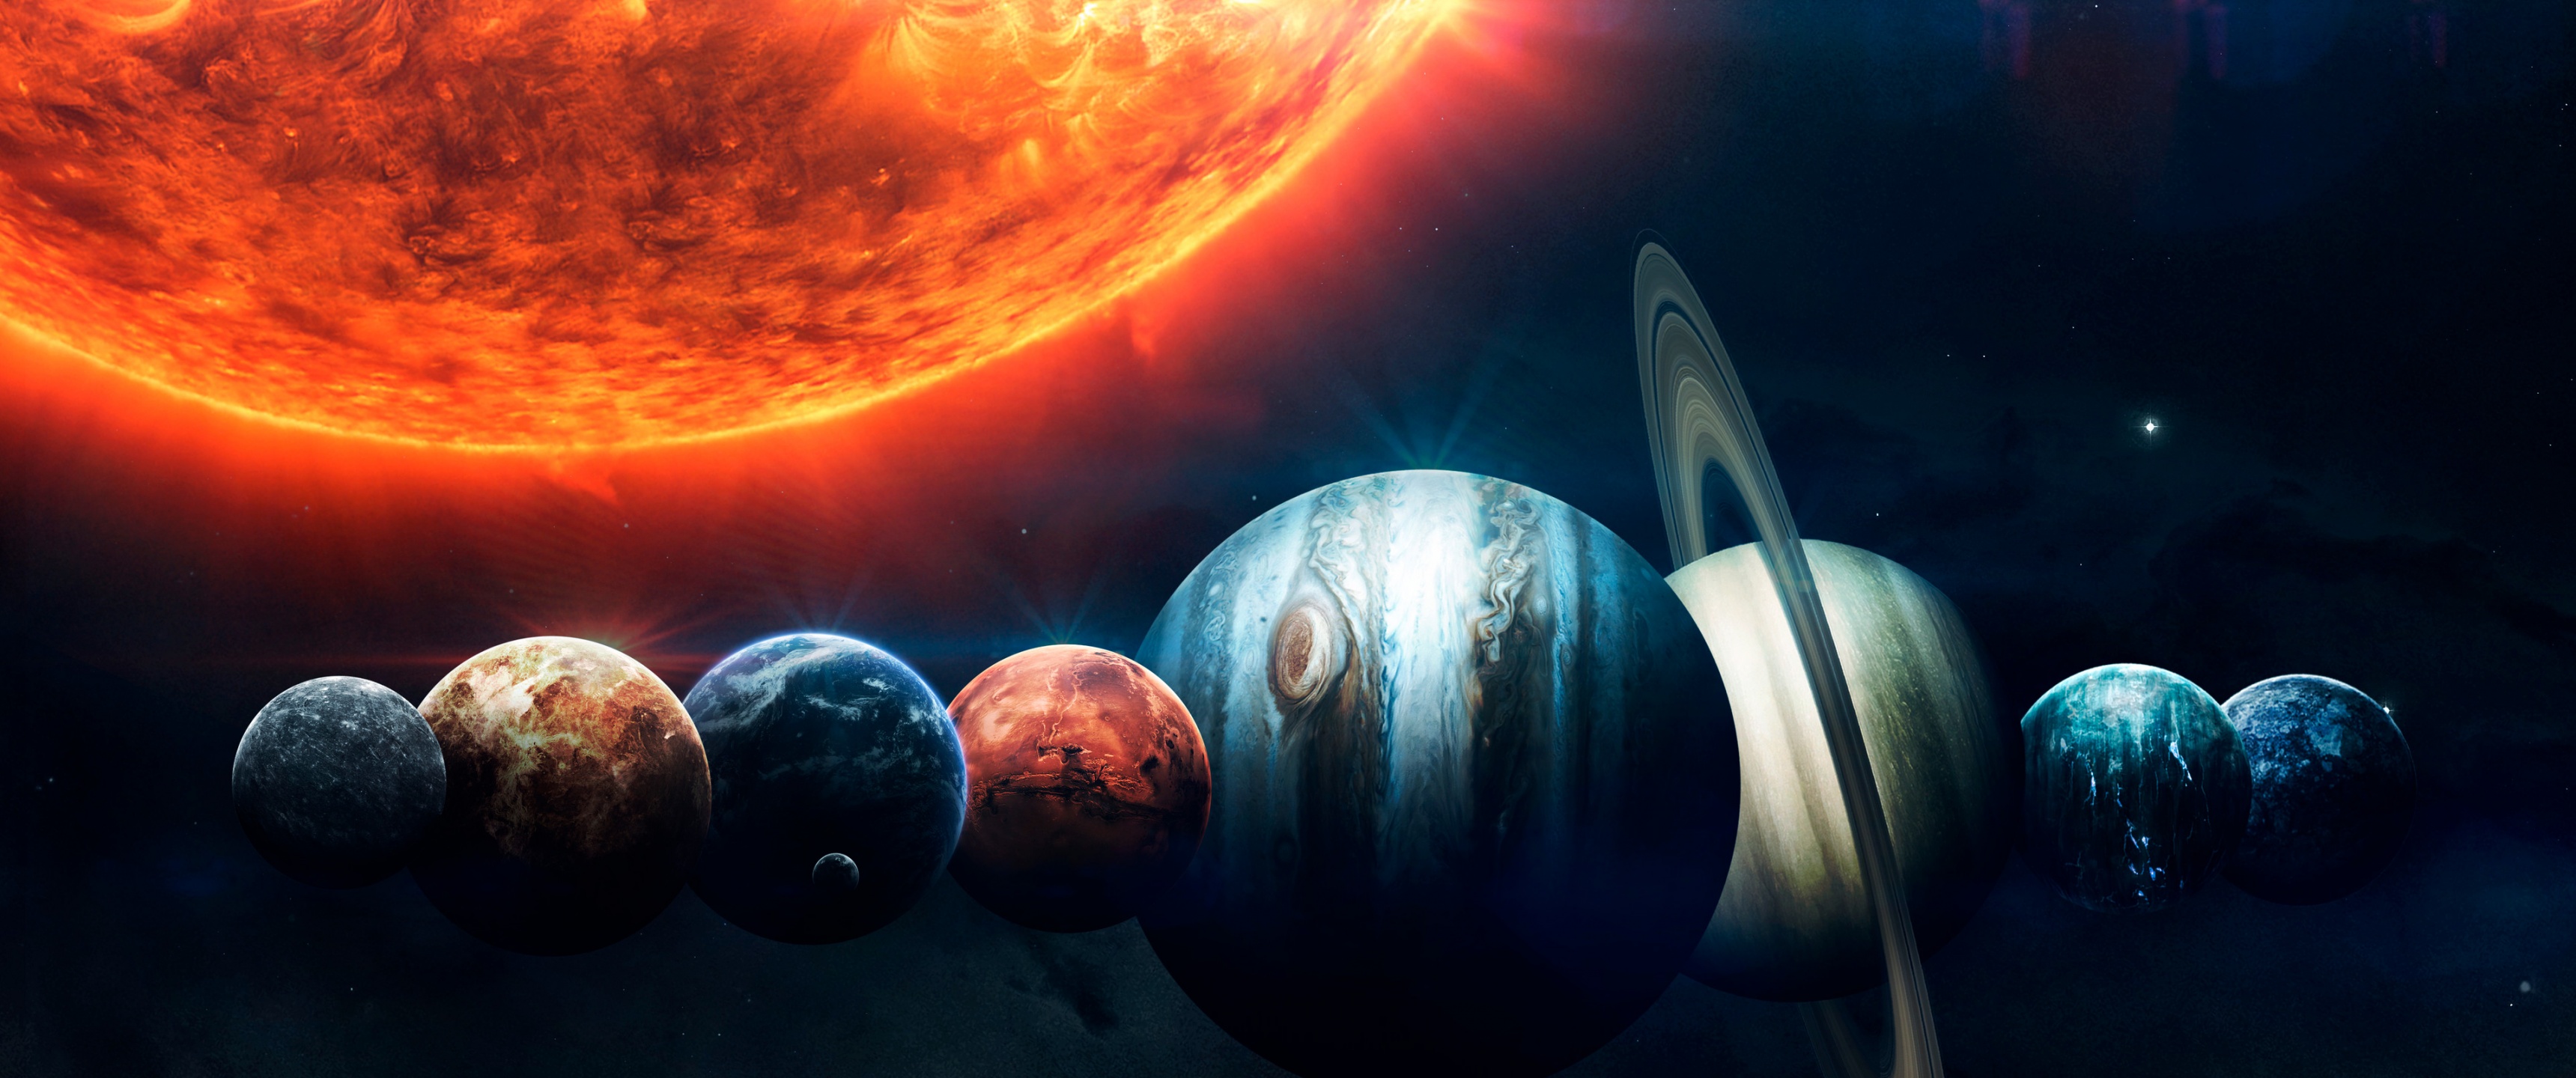 Solar System Ultra HD Wallpapers - Wallpaper Cave